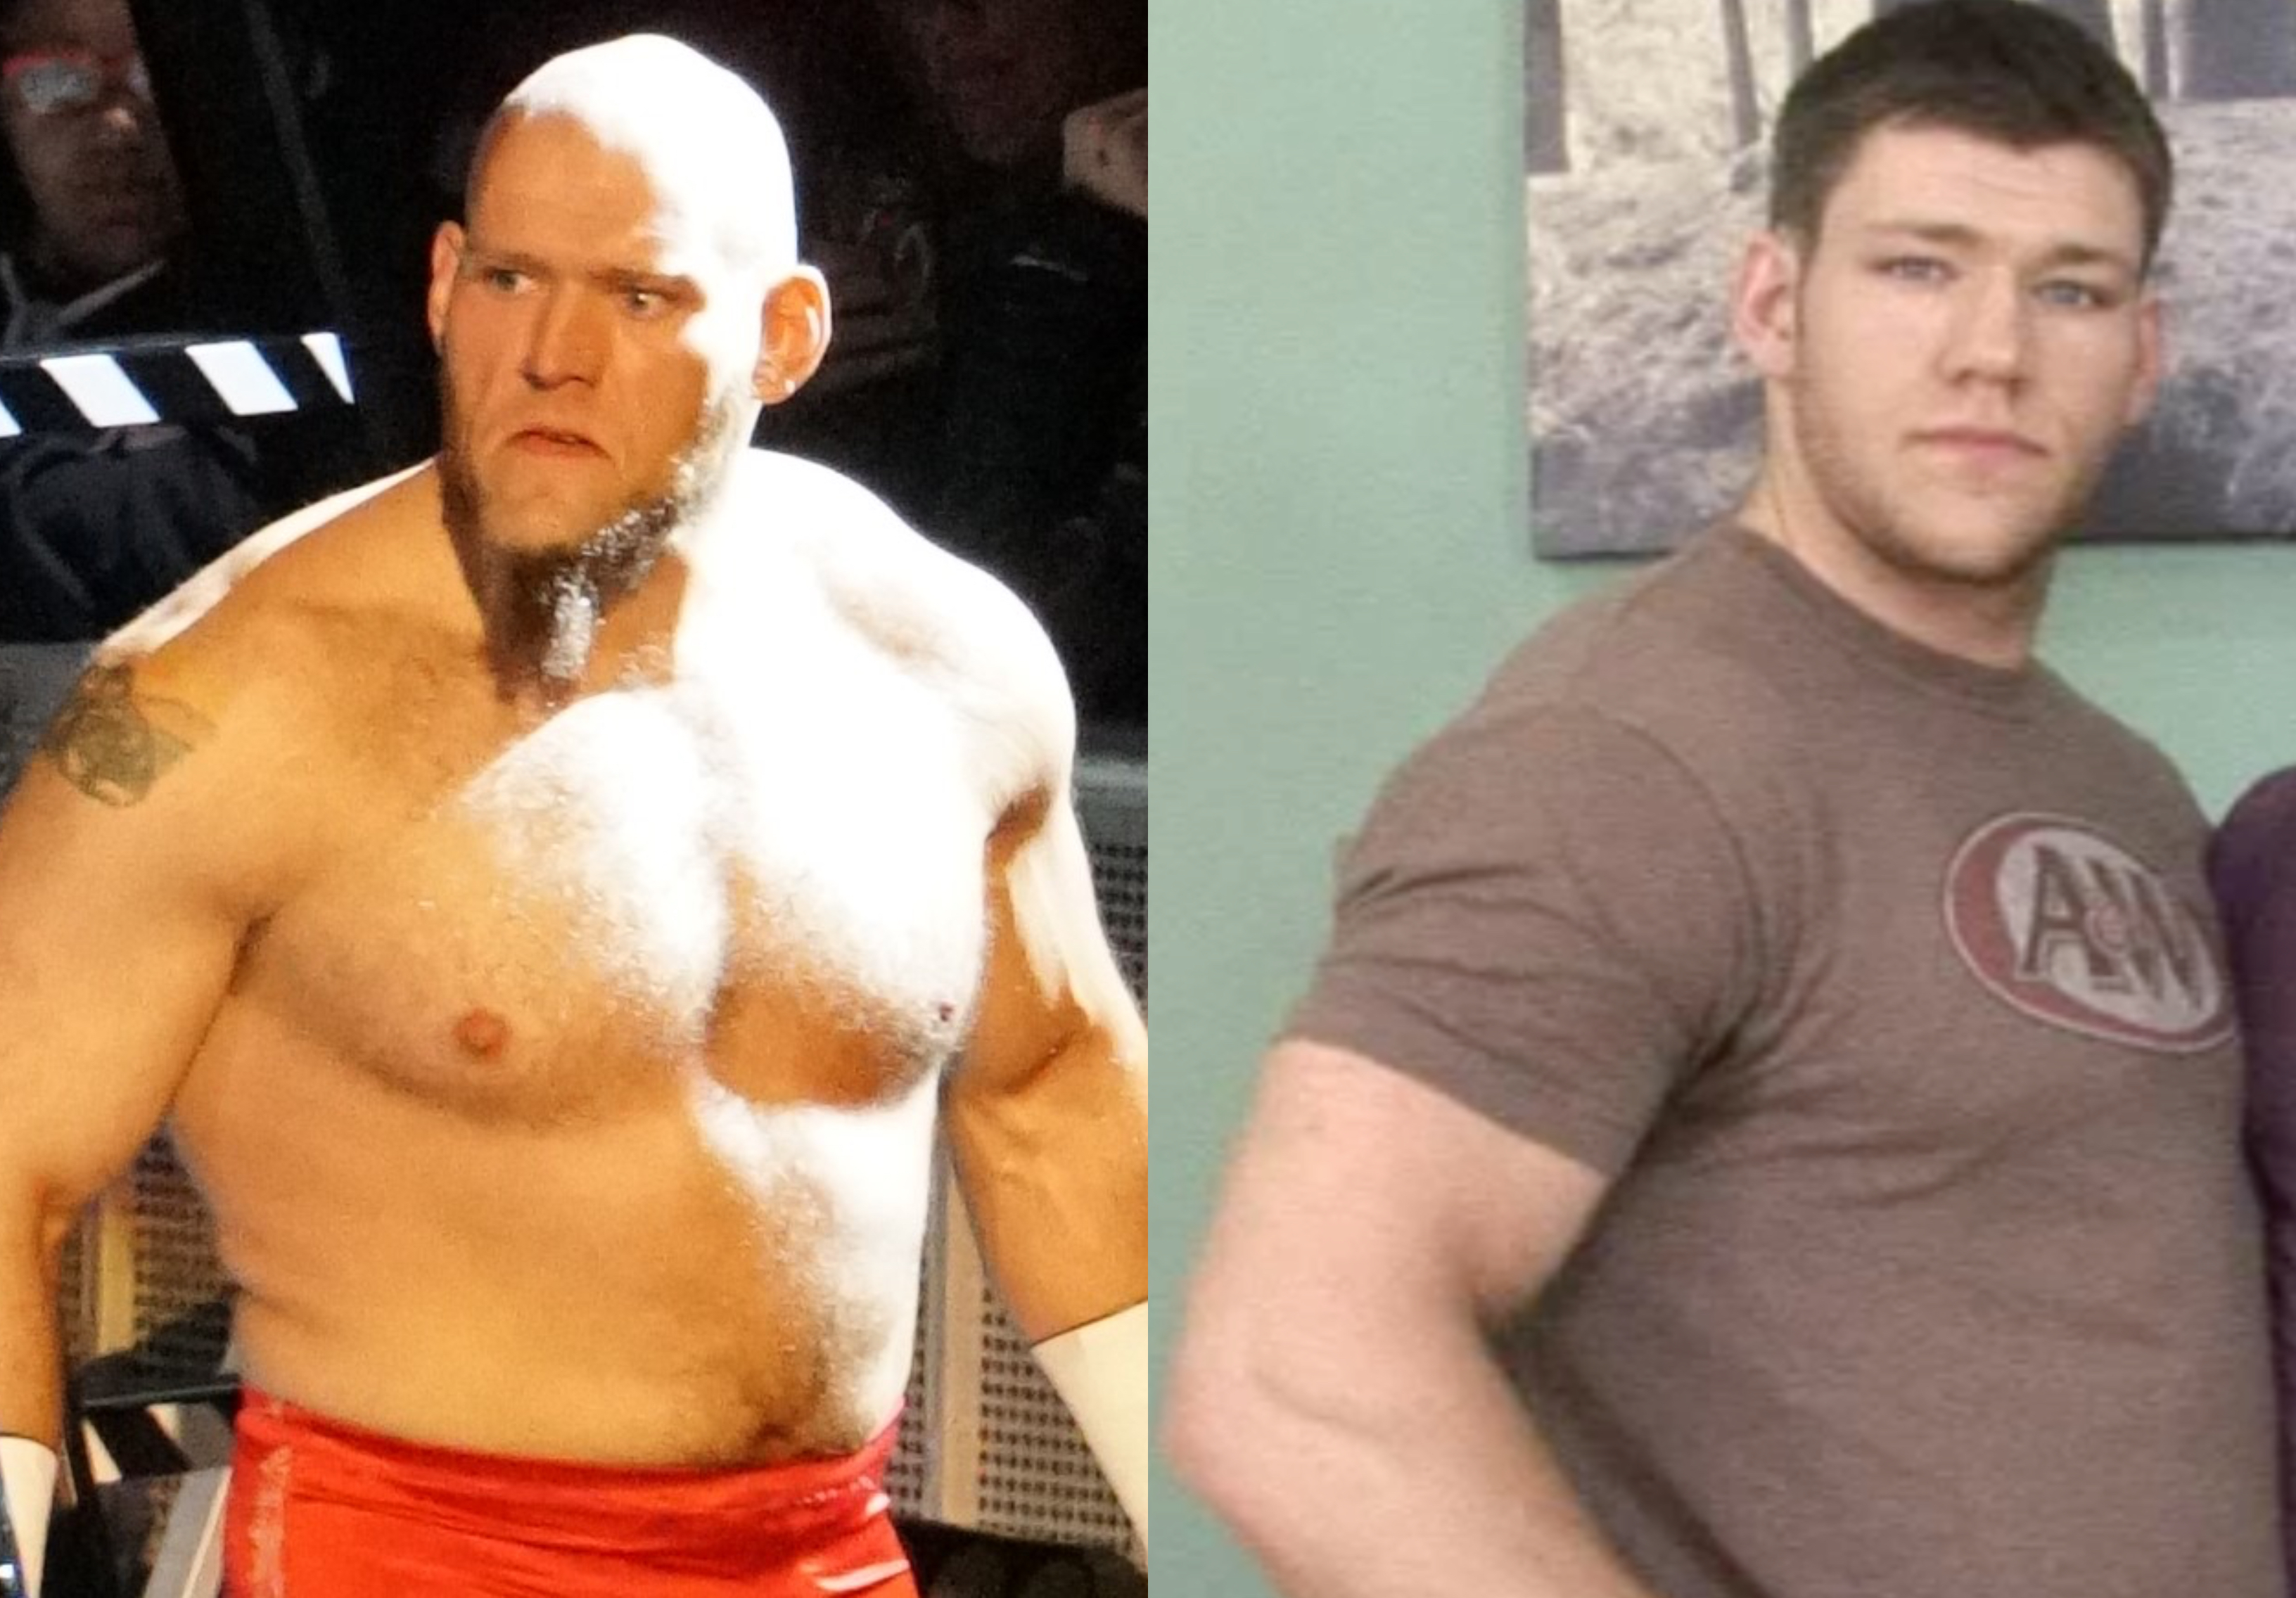 A 'homophobic' WWE wrestler used to allegedly star in gay adult films |  PinkNews